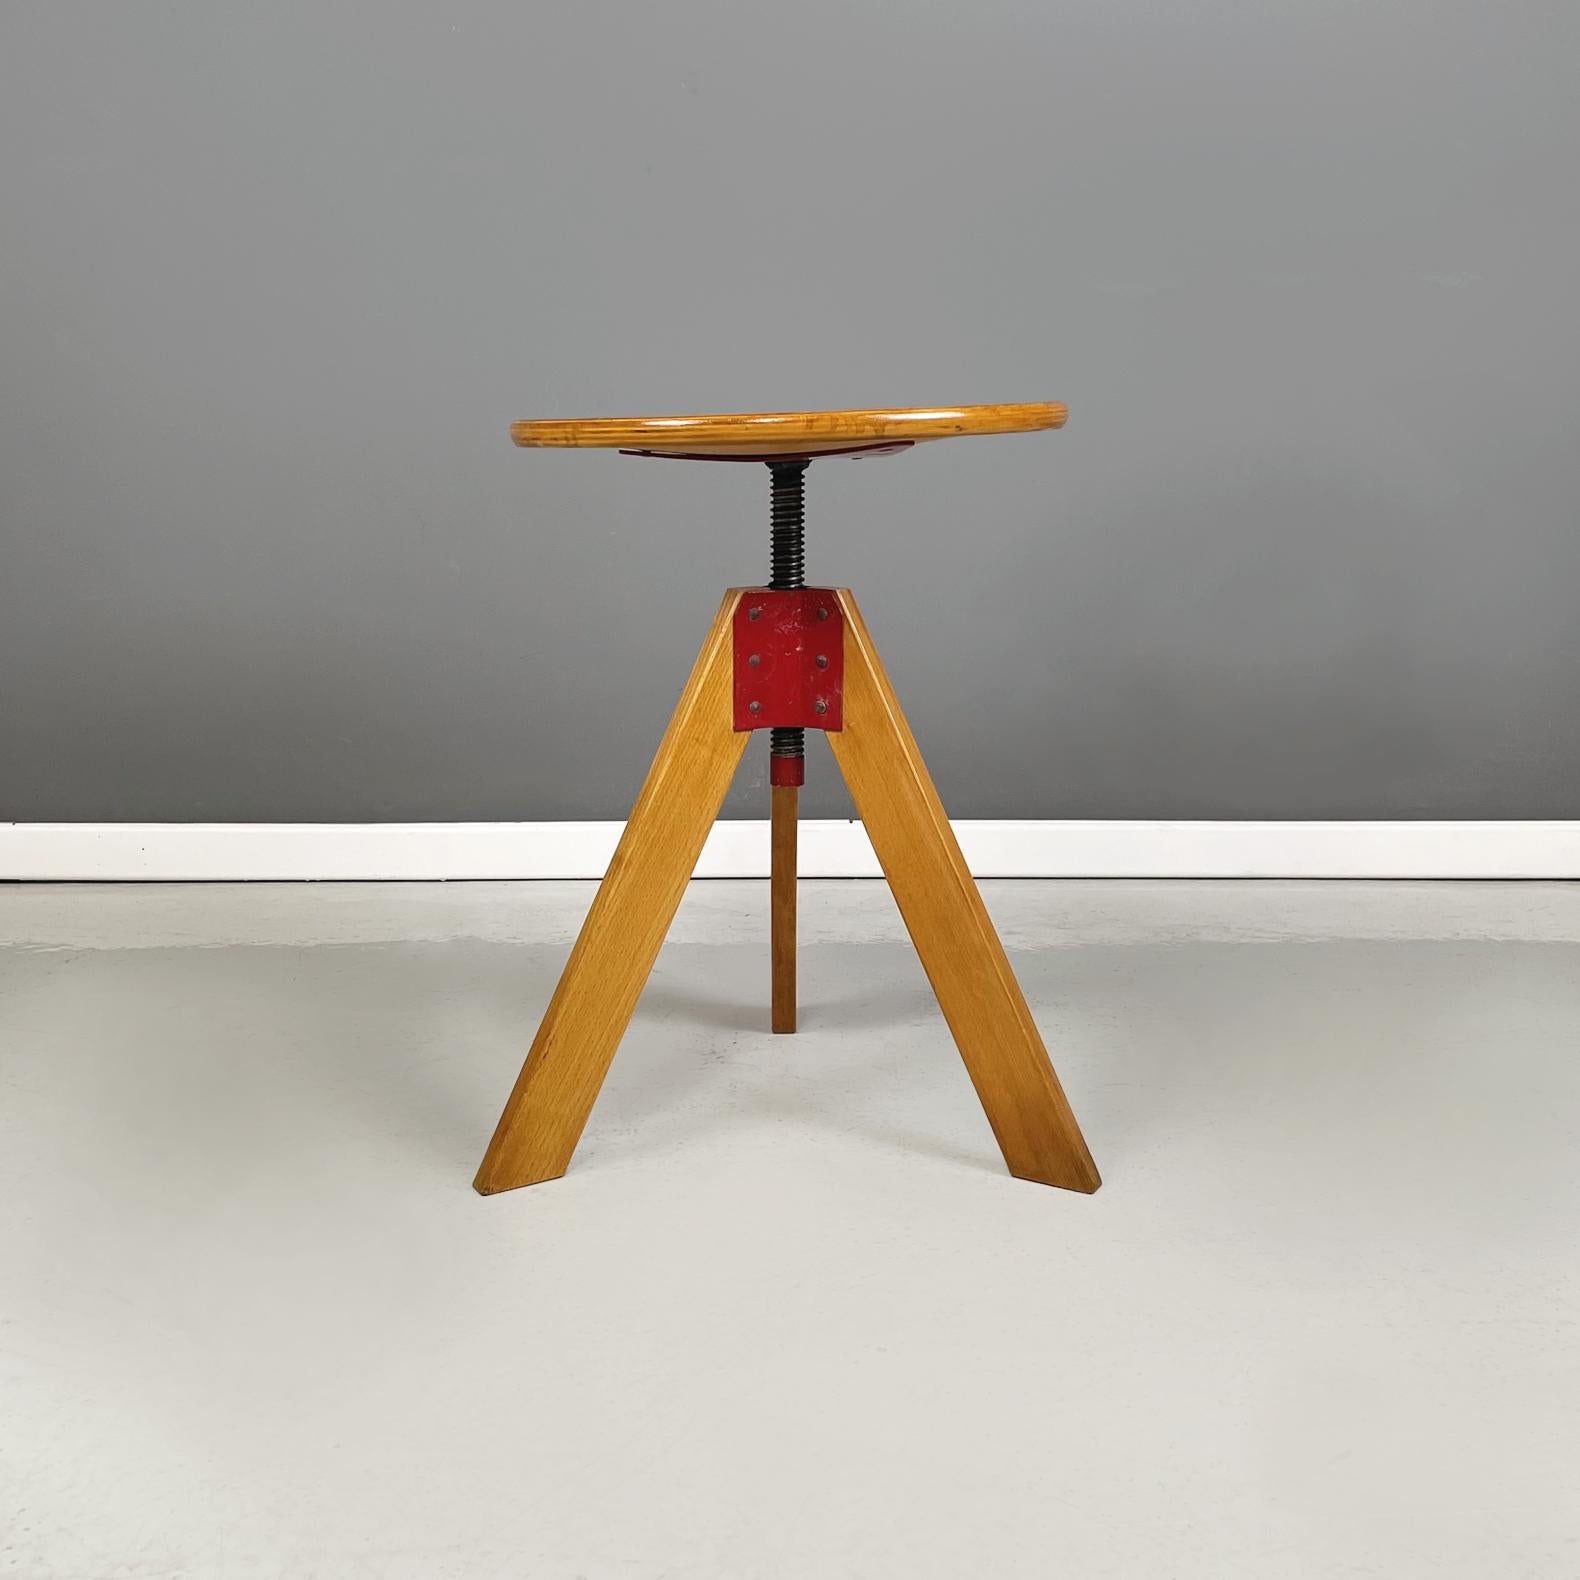 Italian modern Wood swivel stool mod. Giotto by De Pas, D'Urbino and Lomazzi for Zanotta, 1970s
Swivel stool mod. Giotto with round wooden seat. The seat is height-adjustable thanks to the rotation of a metal screw. The rectangular section legs are